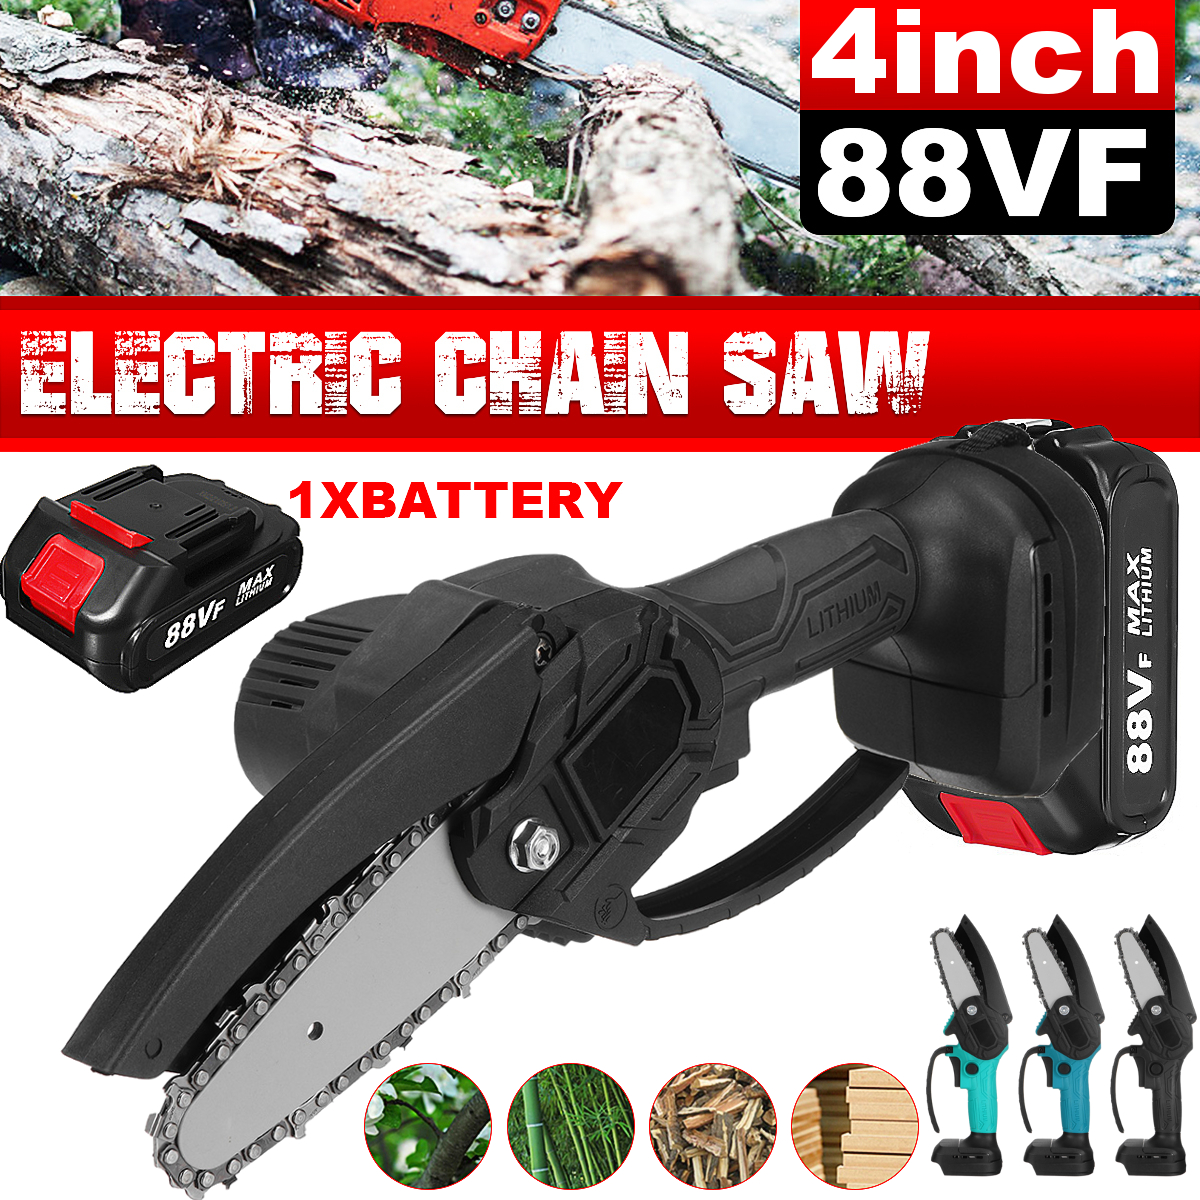 88VF-4-Inch-Cordless-Electric-Chain-Saw-Cordless-Chainsaw-Multi-function-Woodworking-Wood-Cutter-W-B-1861027-1